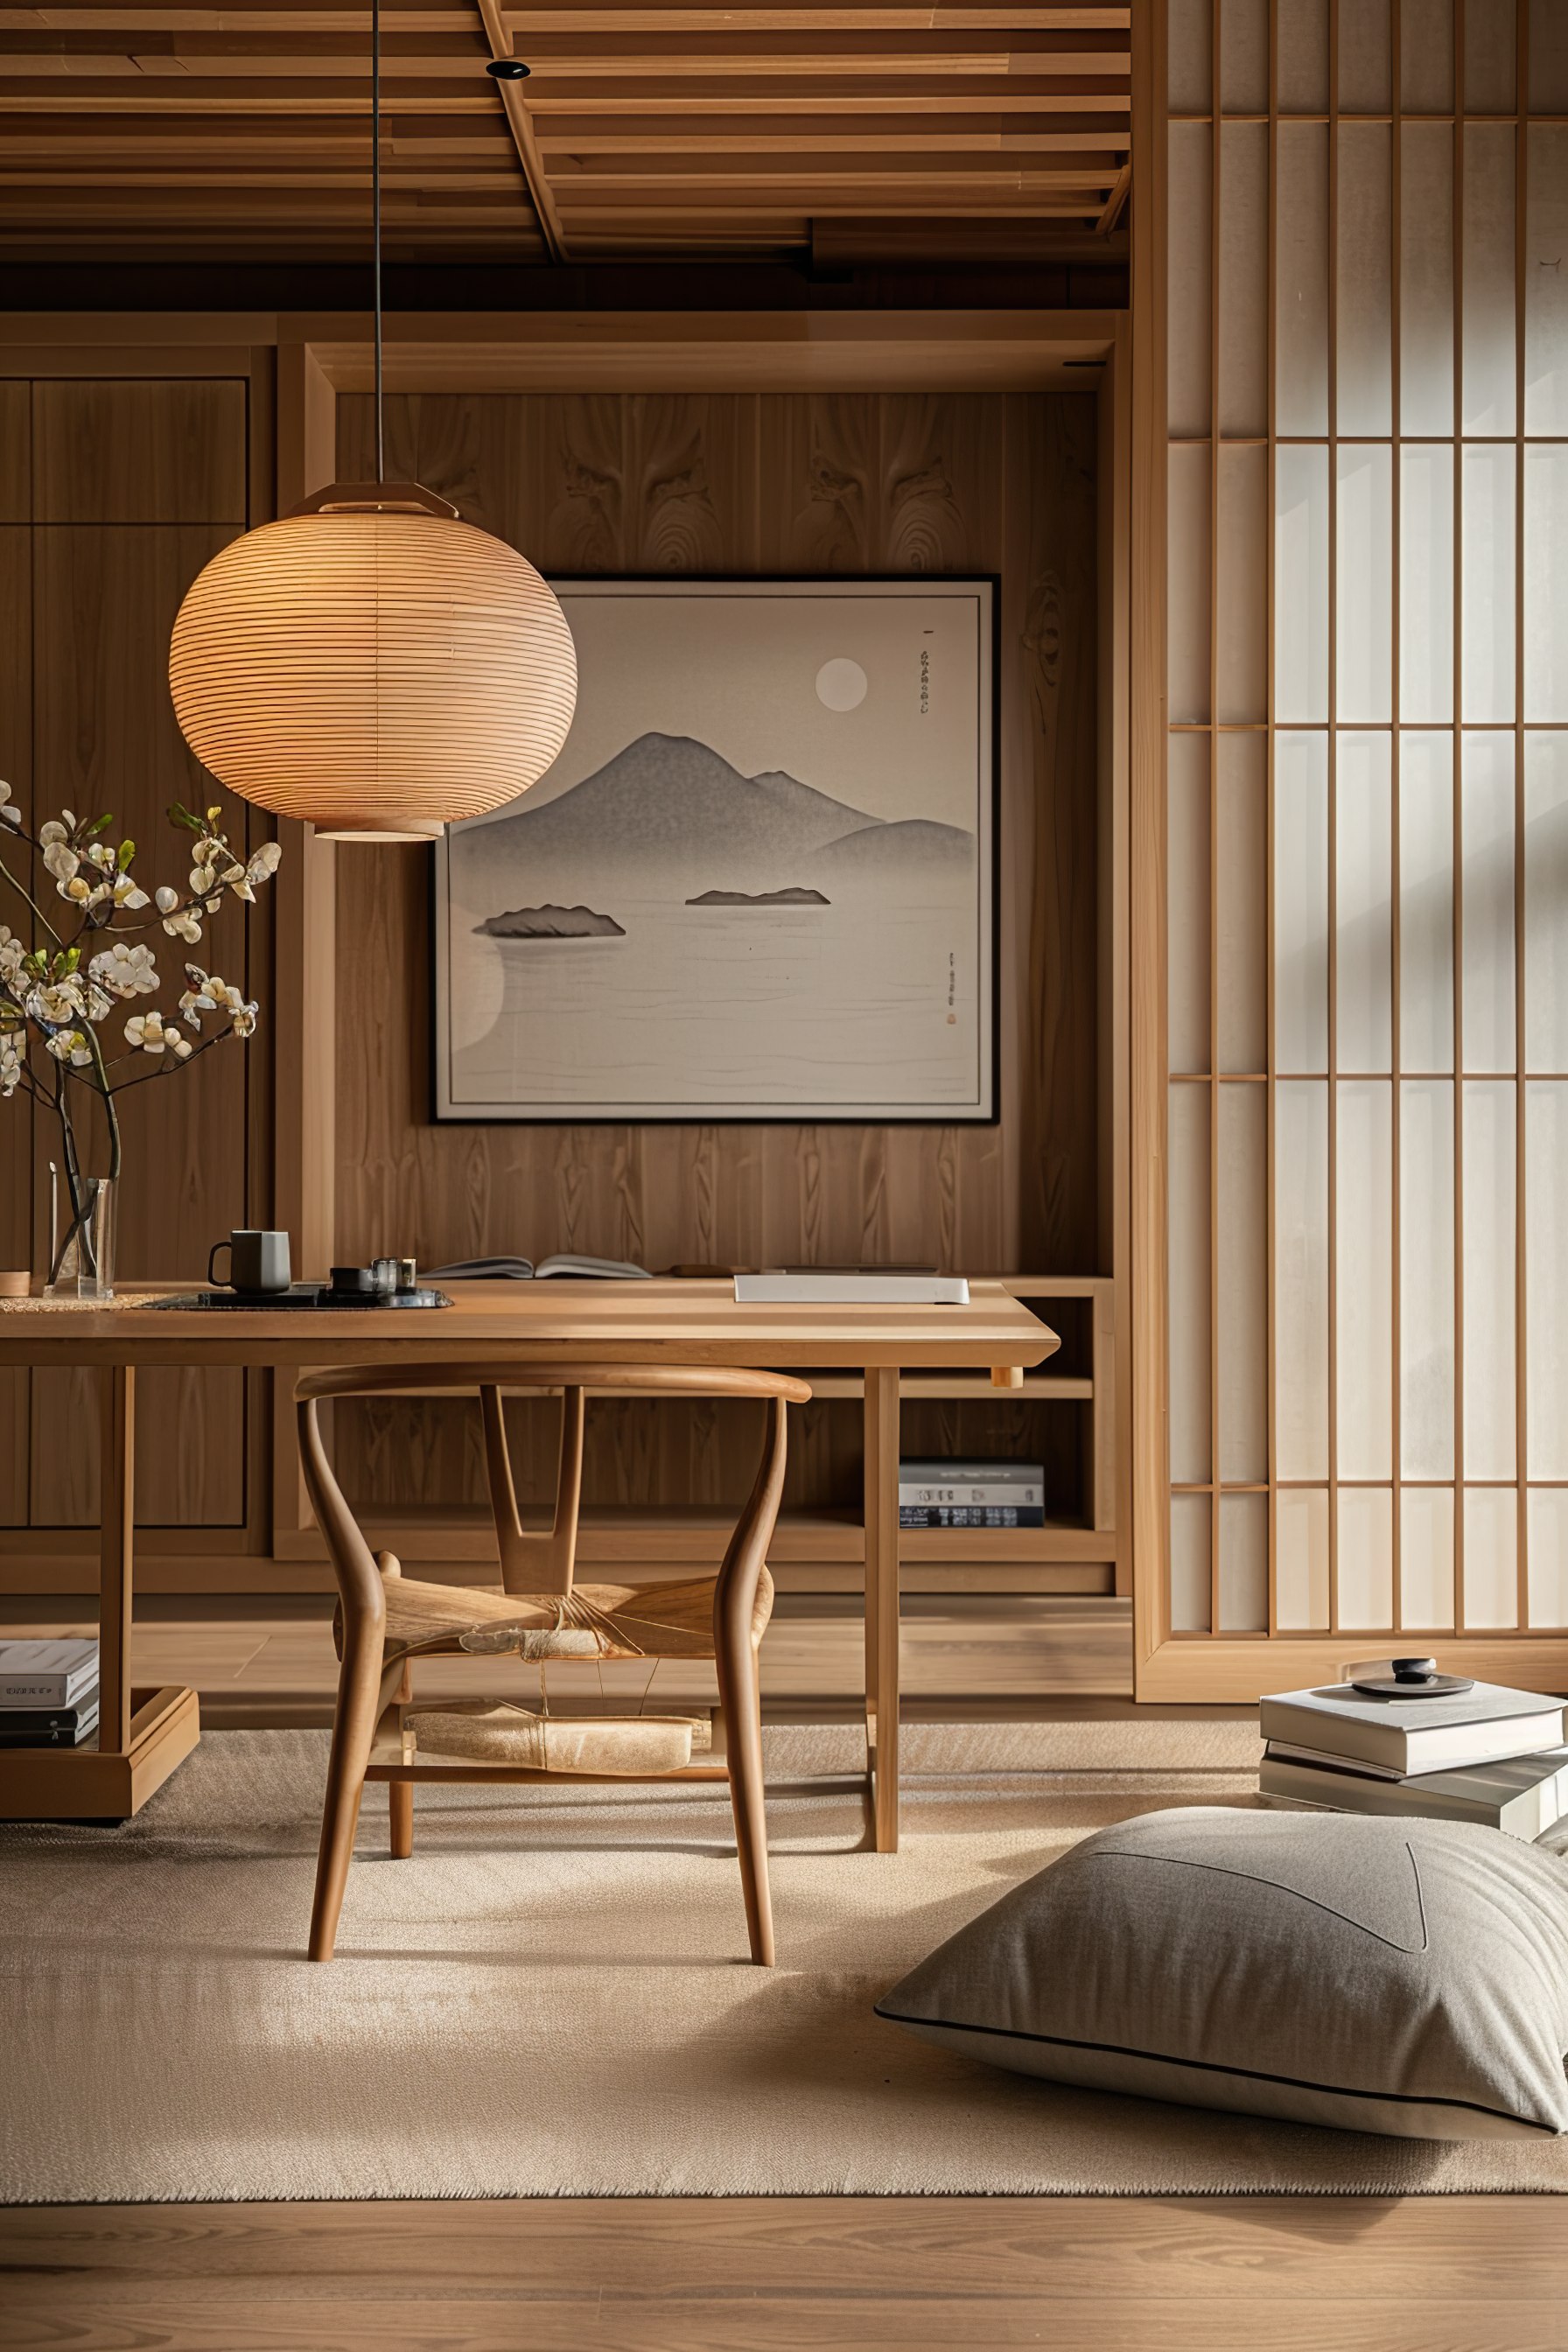 ALT: A modern wooden home office with a minimalist desk, an elegant chair, a large round pendant lamp, traditional shoji screens, and Asian-inspired art.